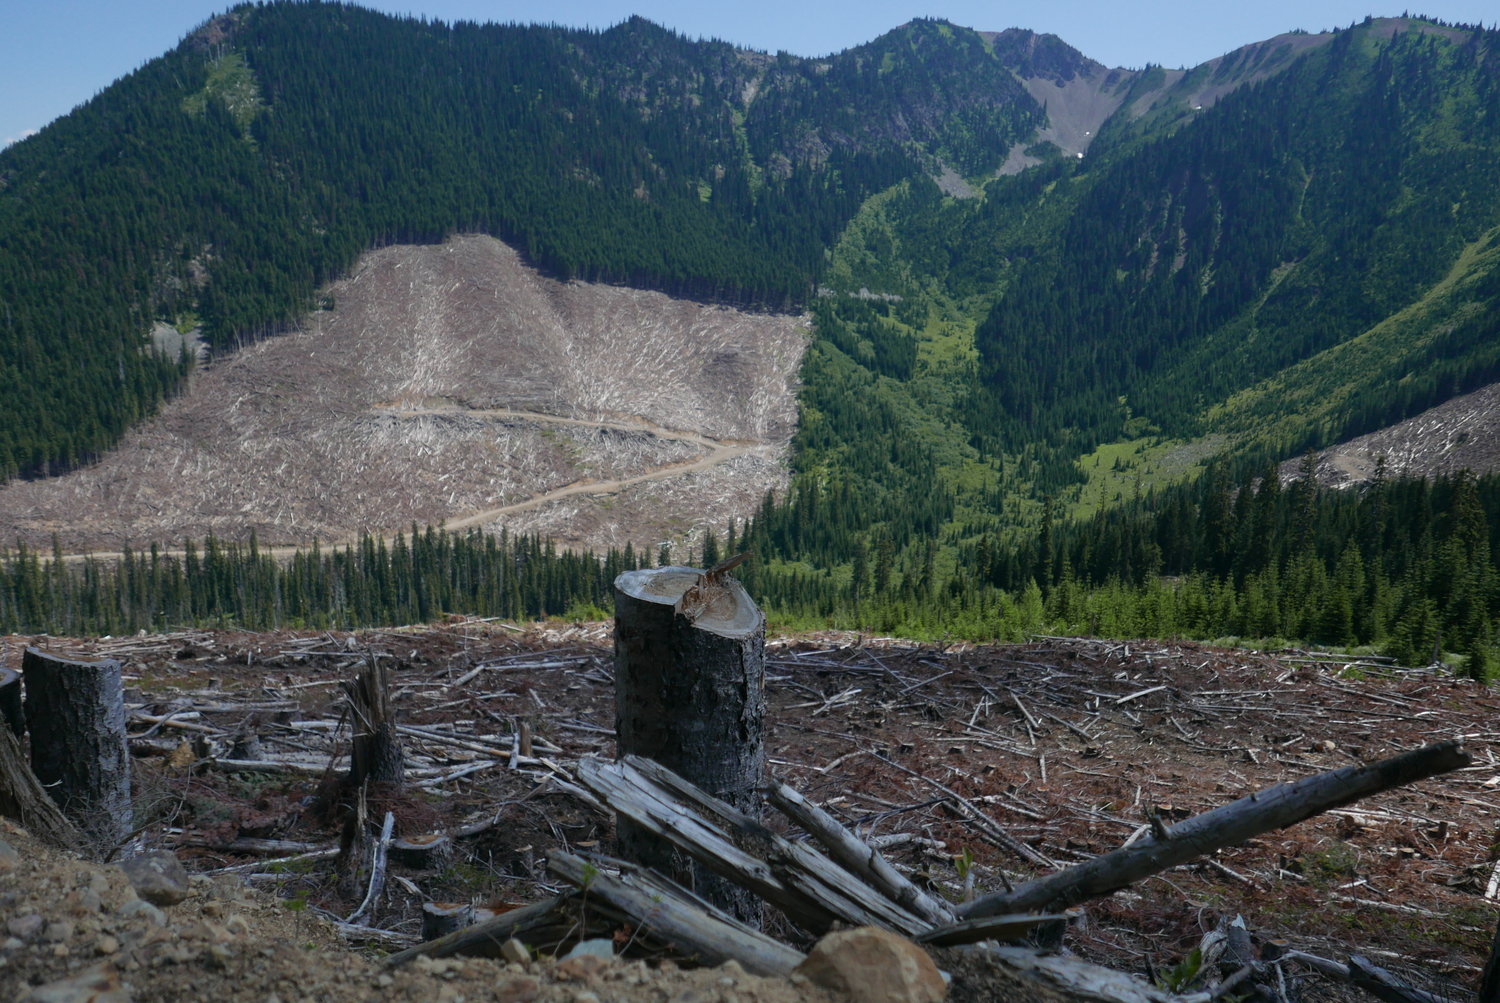 The Donut Hole at the Skagit River headwaters 15 miles north of the U.S./Canada border.